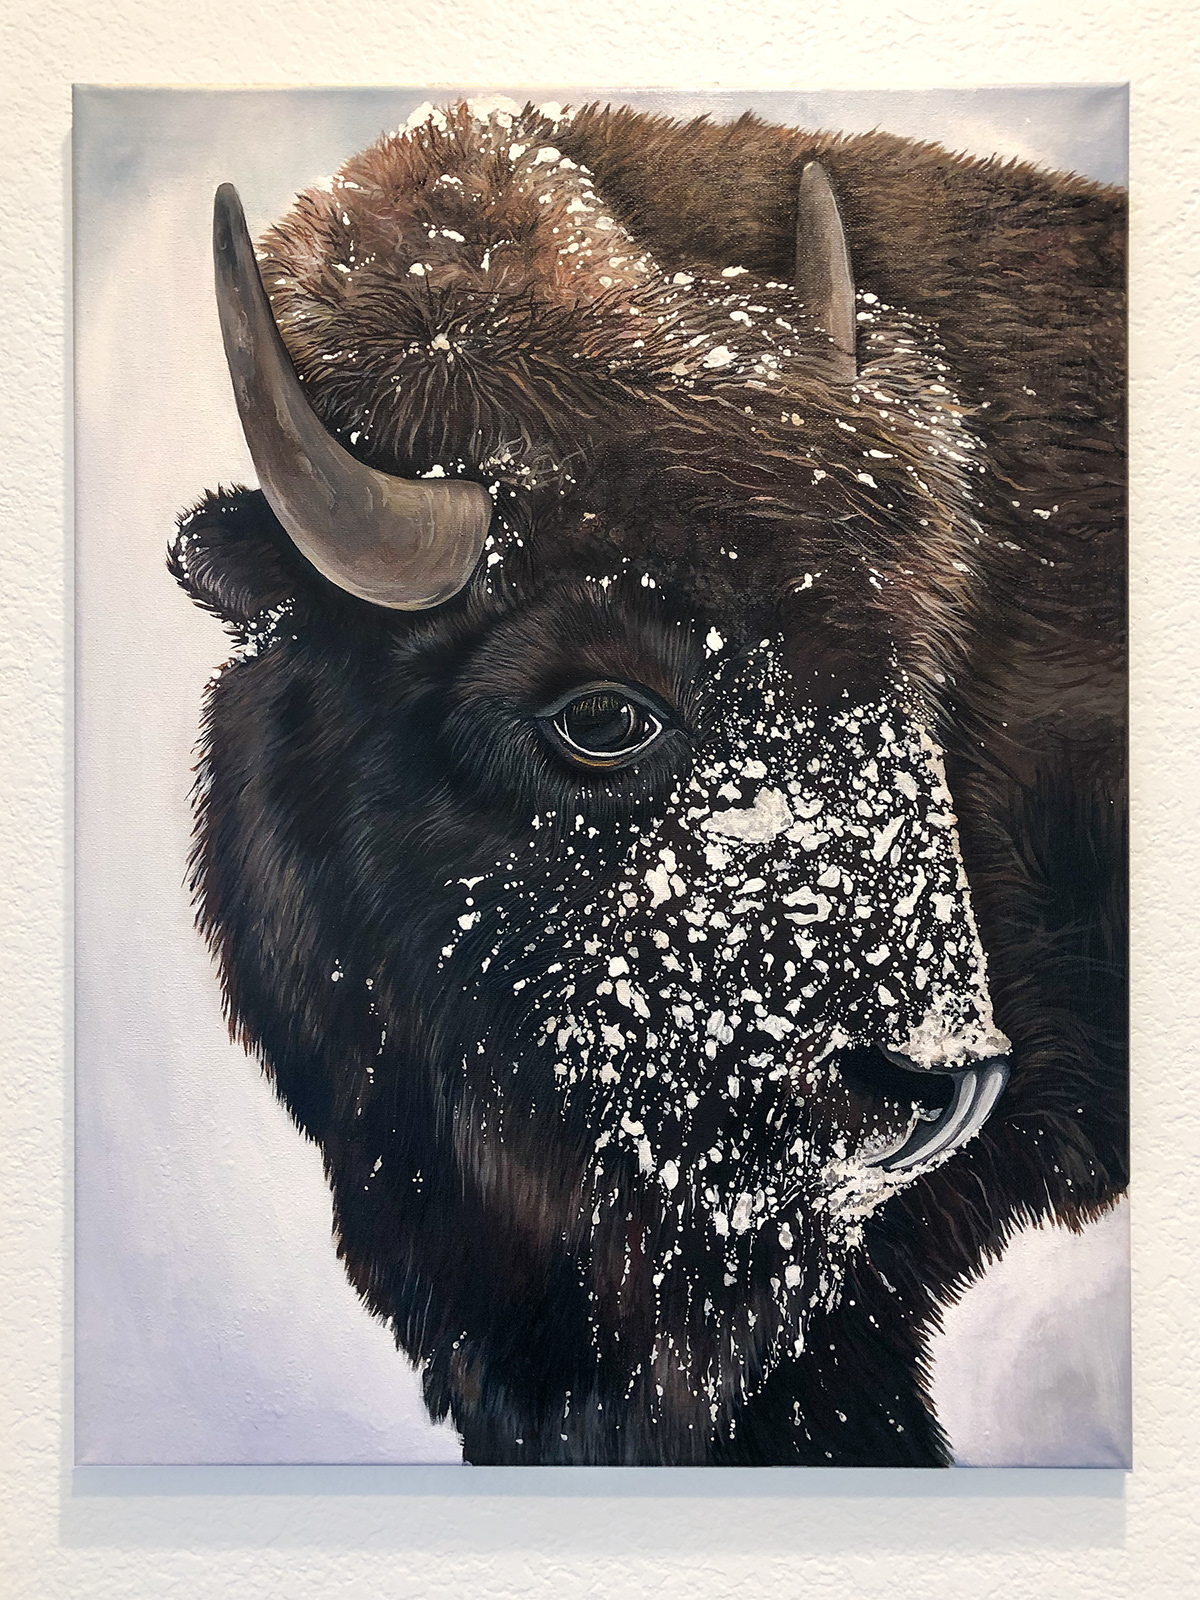 Bison painting, acrylic on canvas 18x24